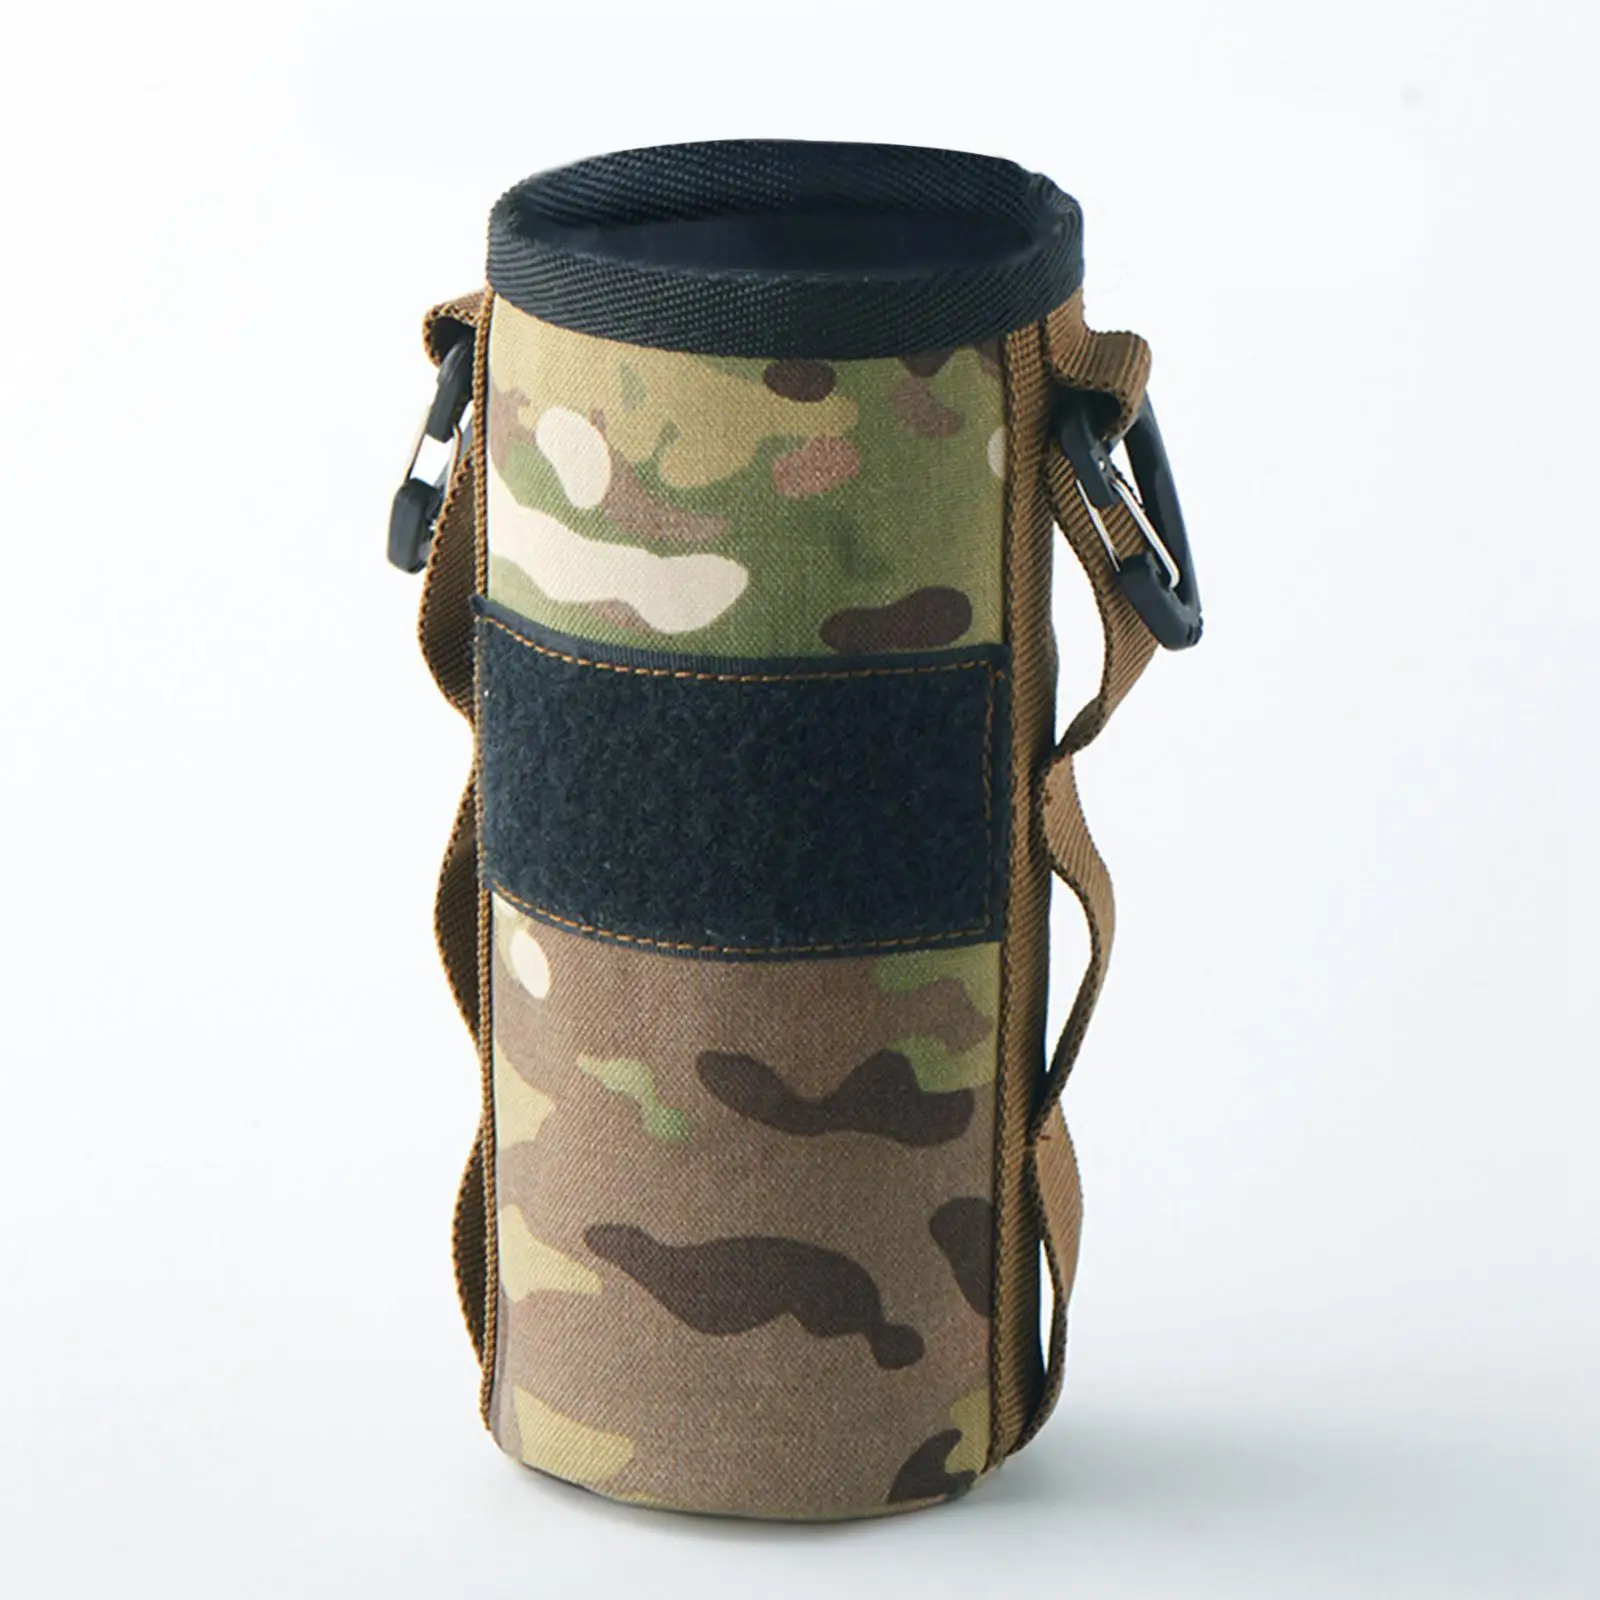 Gas Tank Protective Case Fuel Cylinder Canister Storage Cover for Camping Outdoor